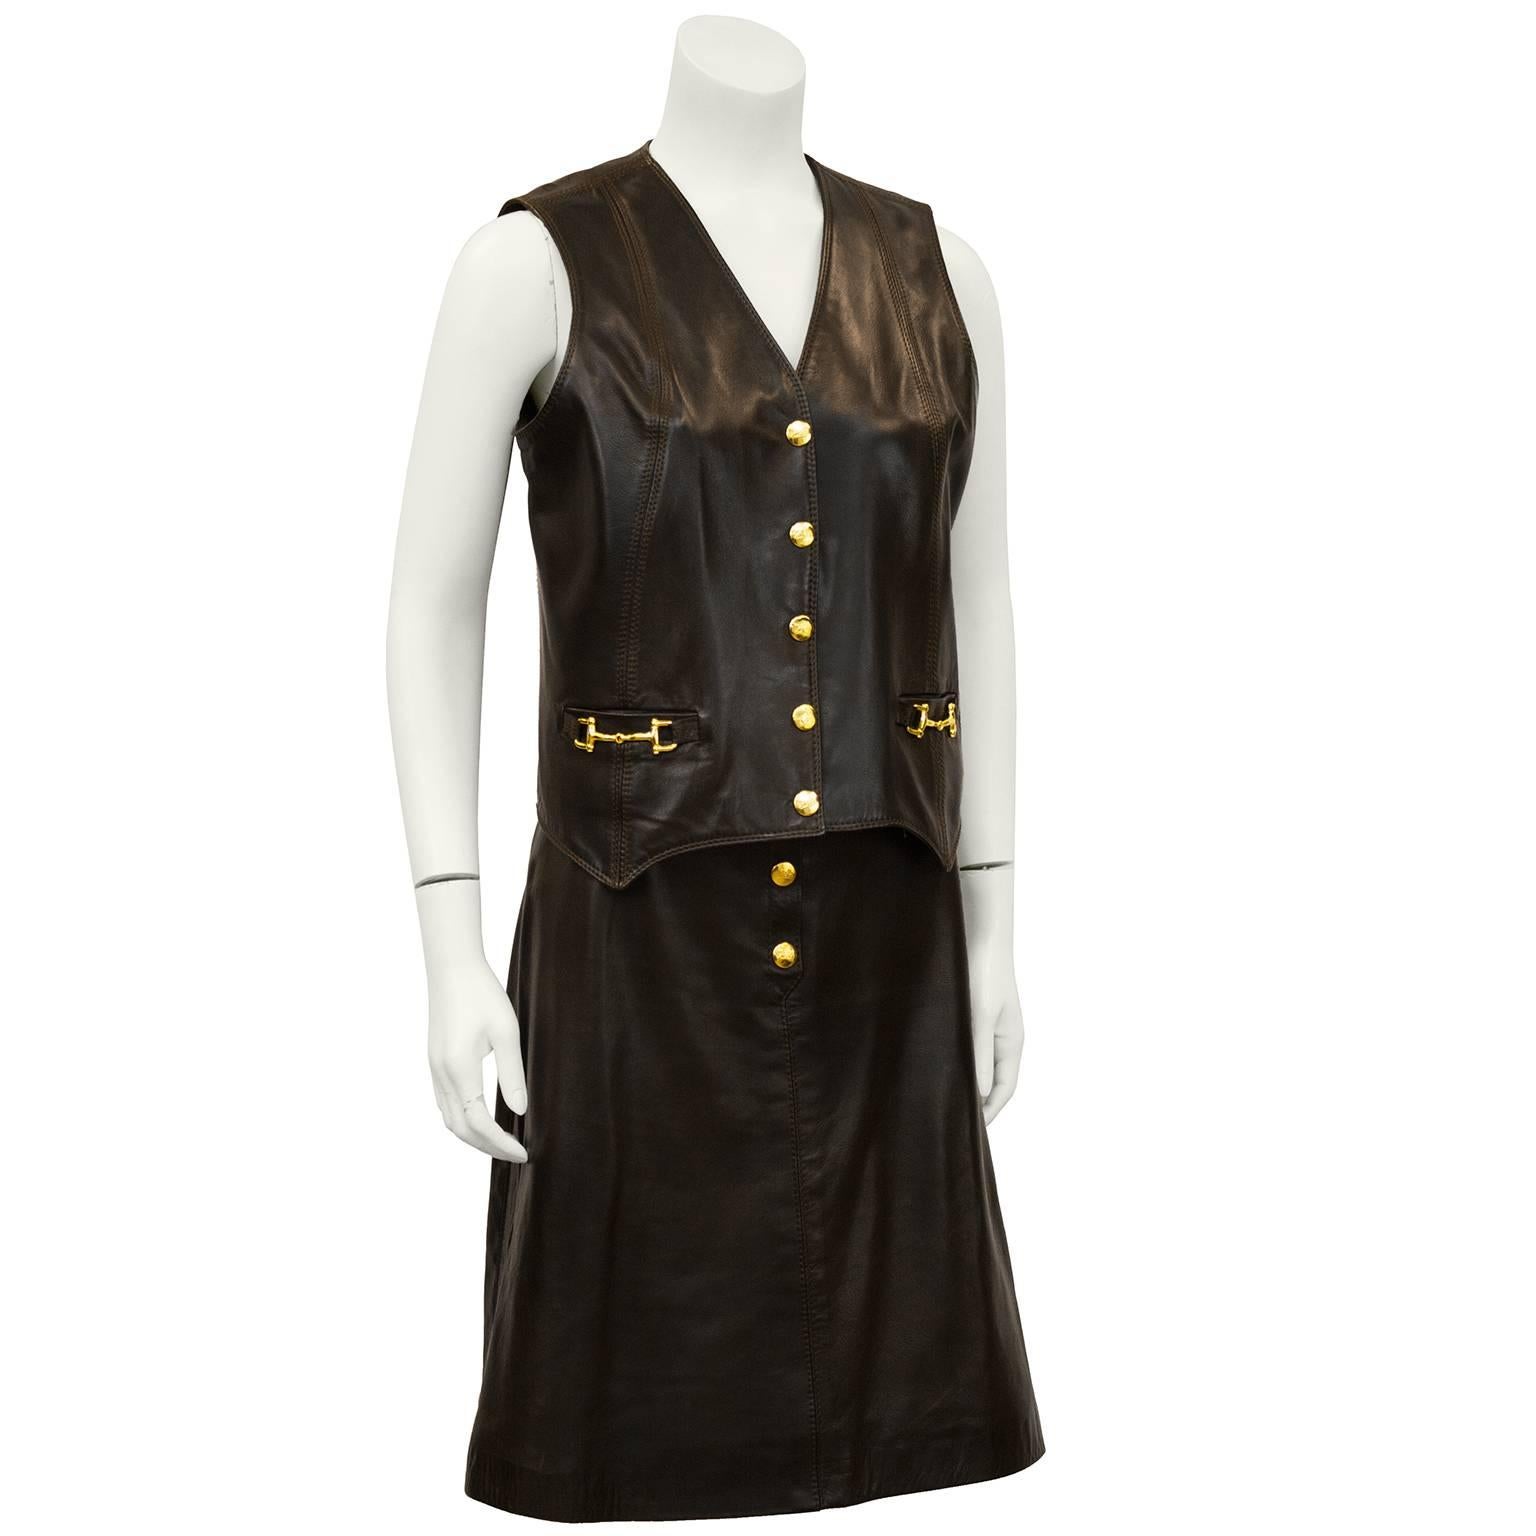 1970's Celine brown leather vest and skirt ensemble. Accented with gold hardware snaps and decorative horse bits on vest pockets. Vest would be wonderful with jeans and the skirt has a great shape that works with a variety of tops. Very versatile